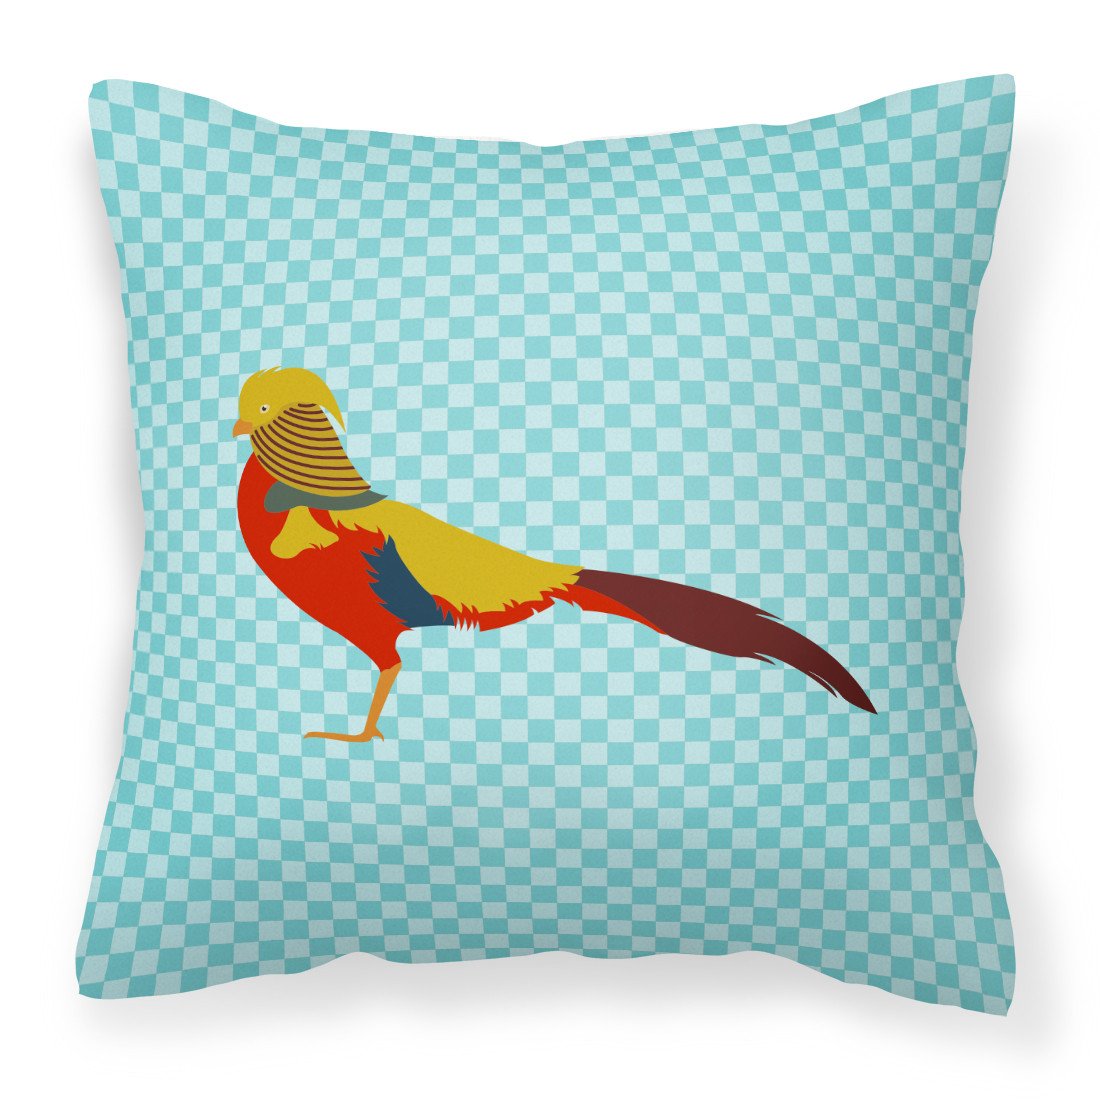 Golden or Chinese Pheasant Blue Check Fabric Decorative Pillow BB8102PW1818 by Caroline's Treasures